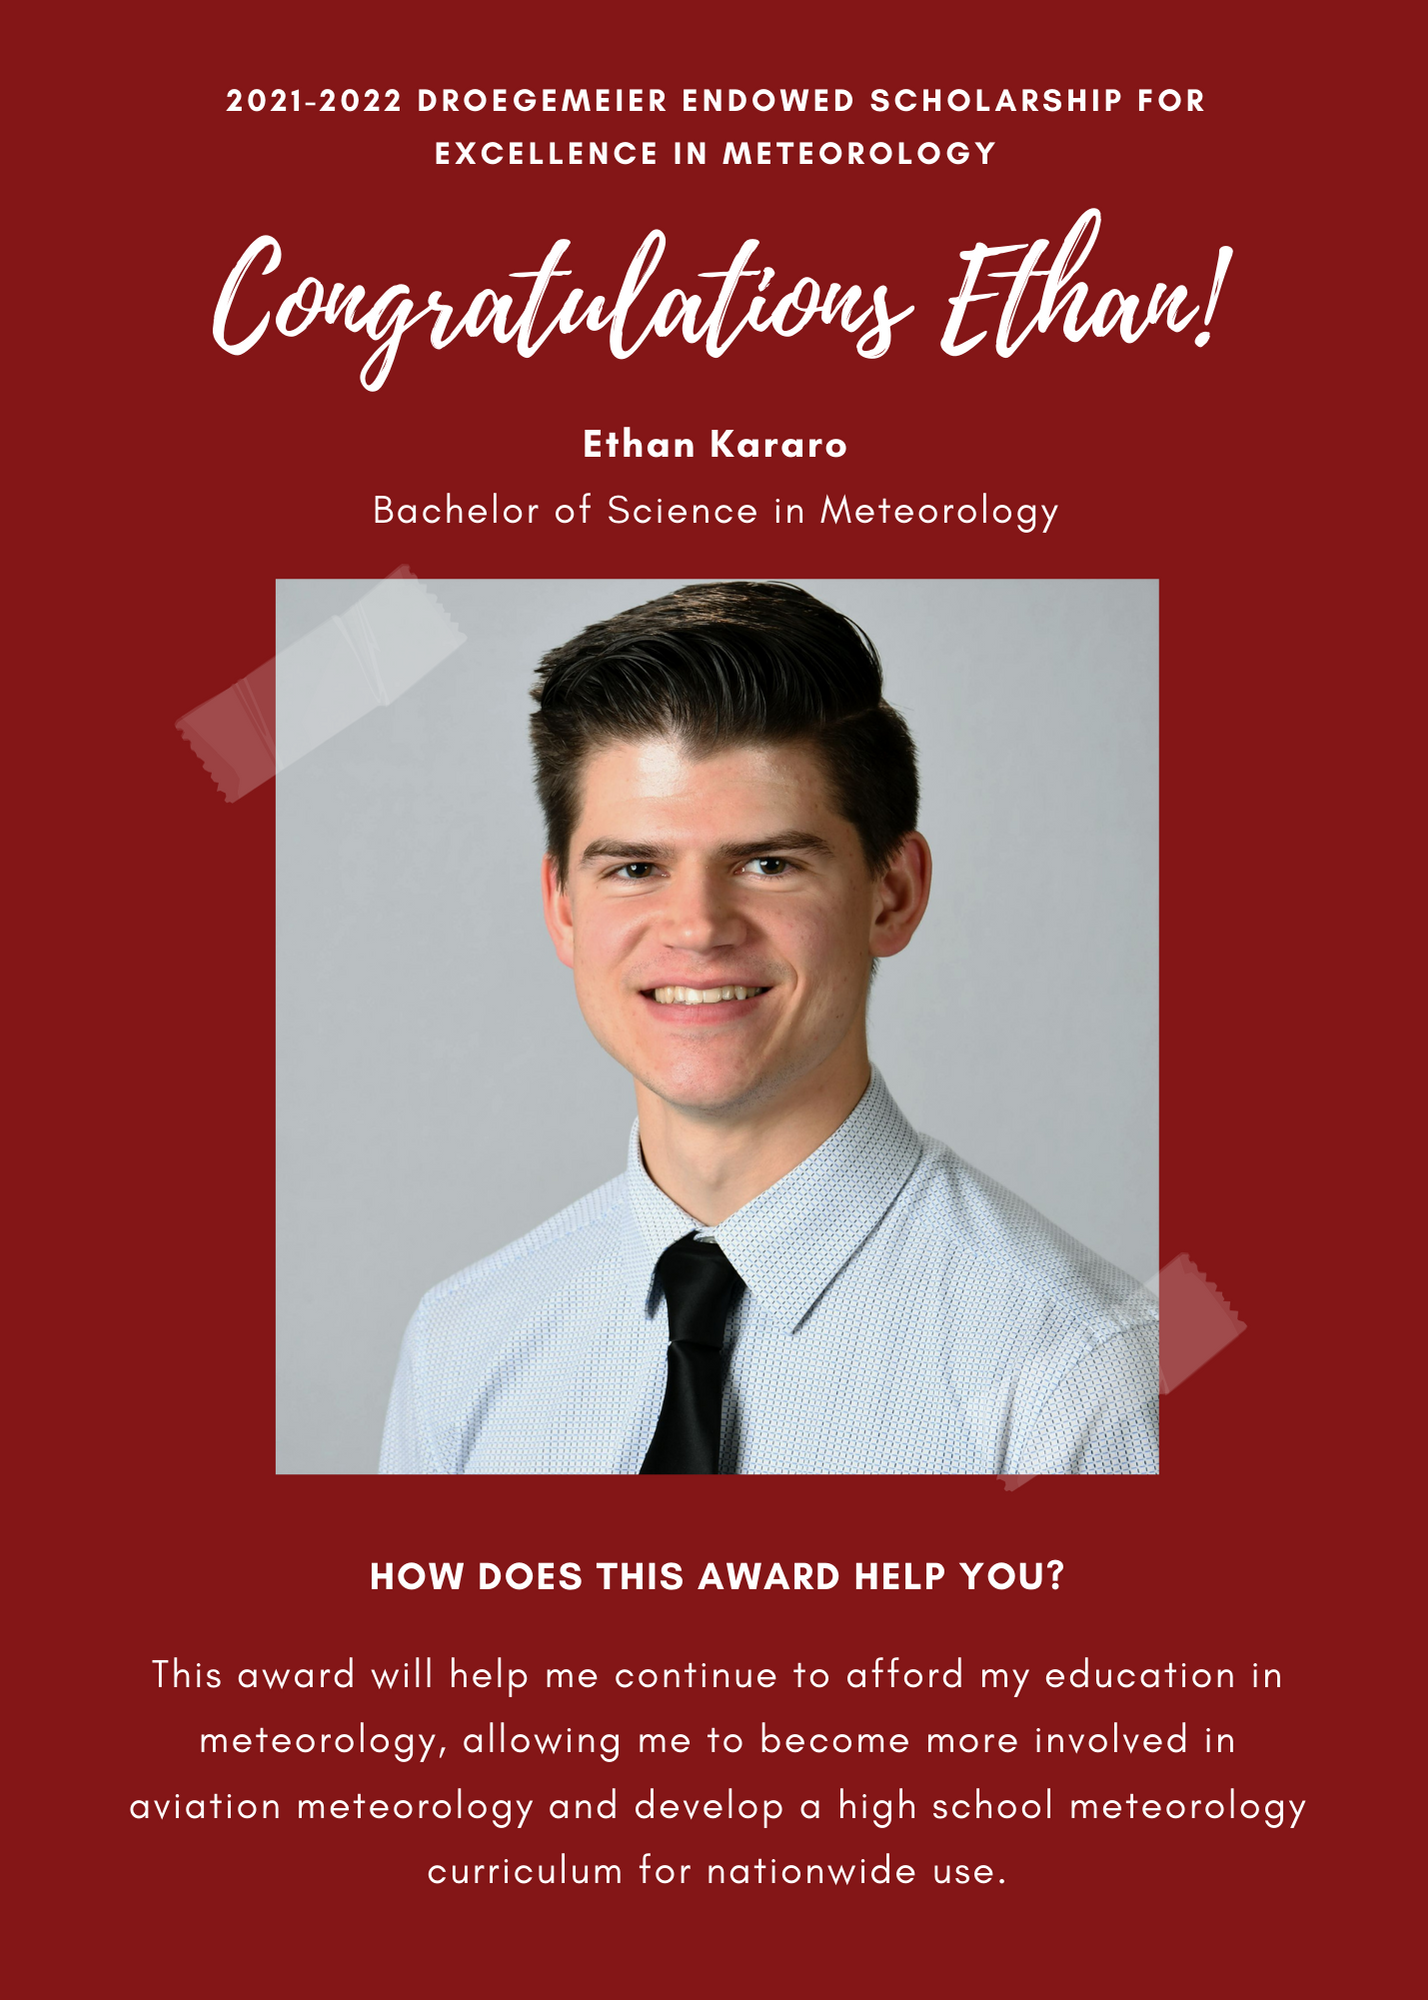 2021 -2022 A&GS Droegemeier Endowed Scholarship for Excellence in Meteorology. Congratulations Ethan! Ethan Kararo Bachelor of Science in Meteorology.  How does this award help you? This awrd will help me continue to afford my education in meteorology, allowing me to become more involved in aviation meteorology and develop a high school meteorology curriculum for nationwide use